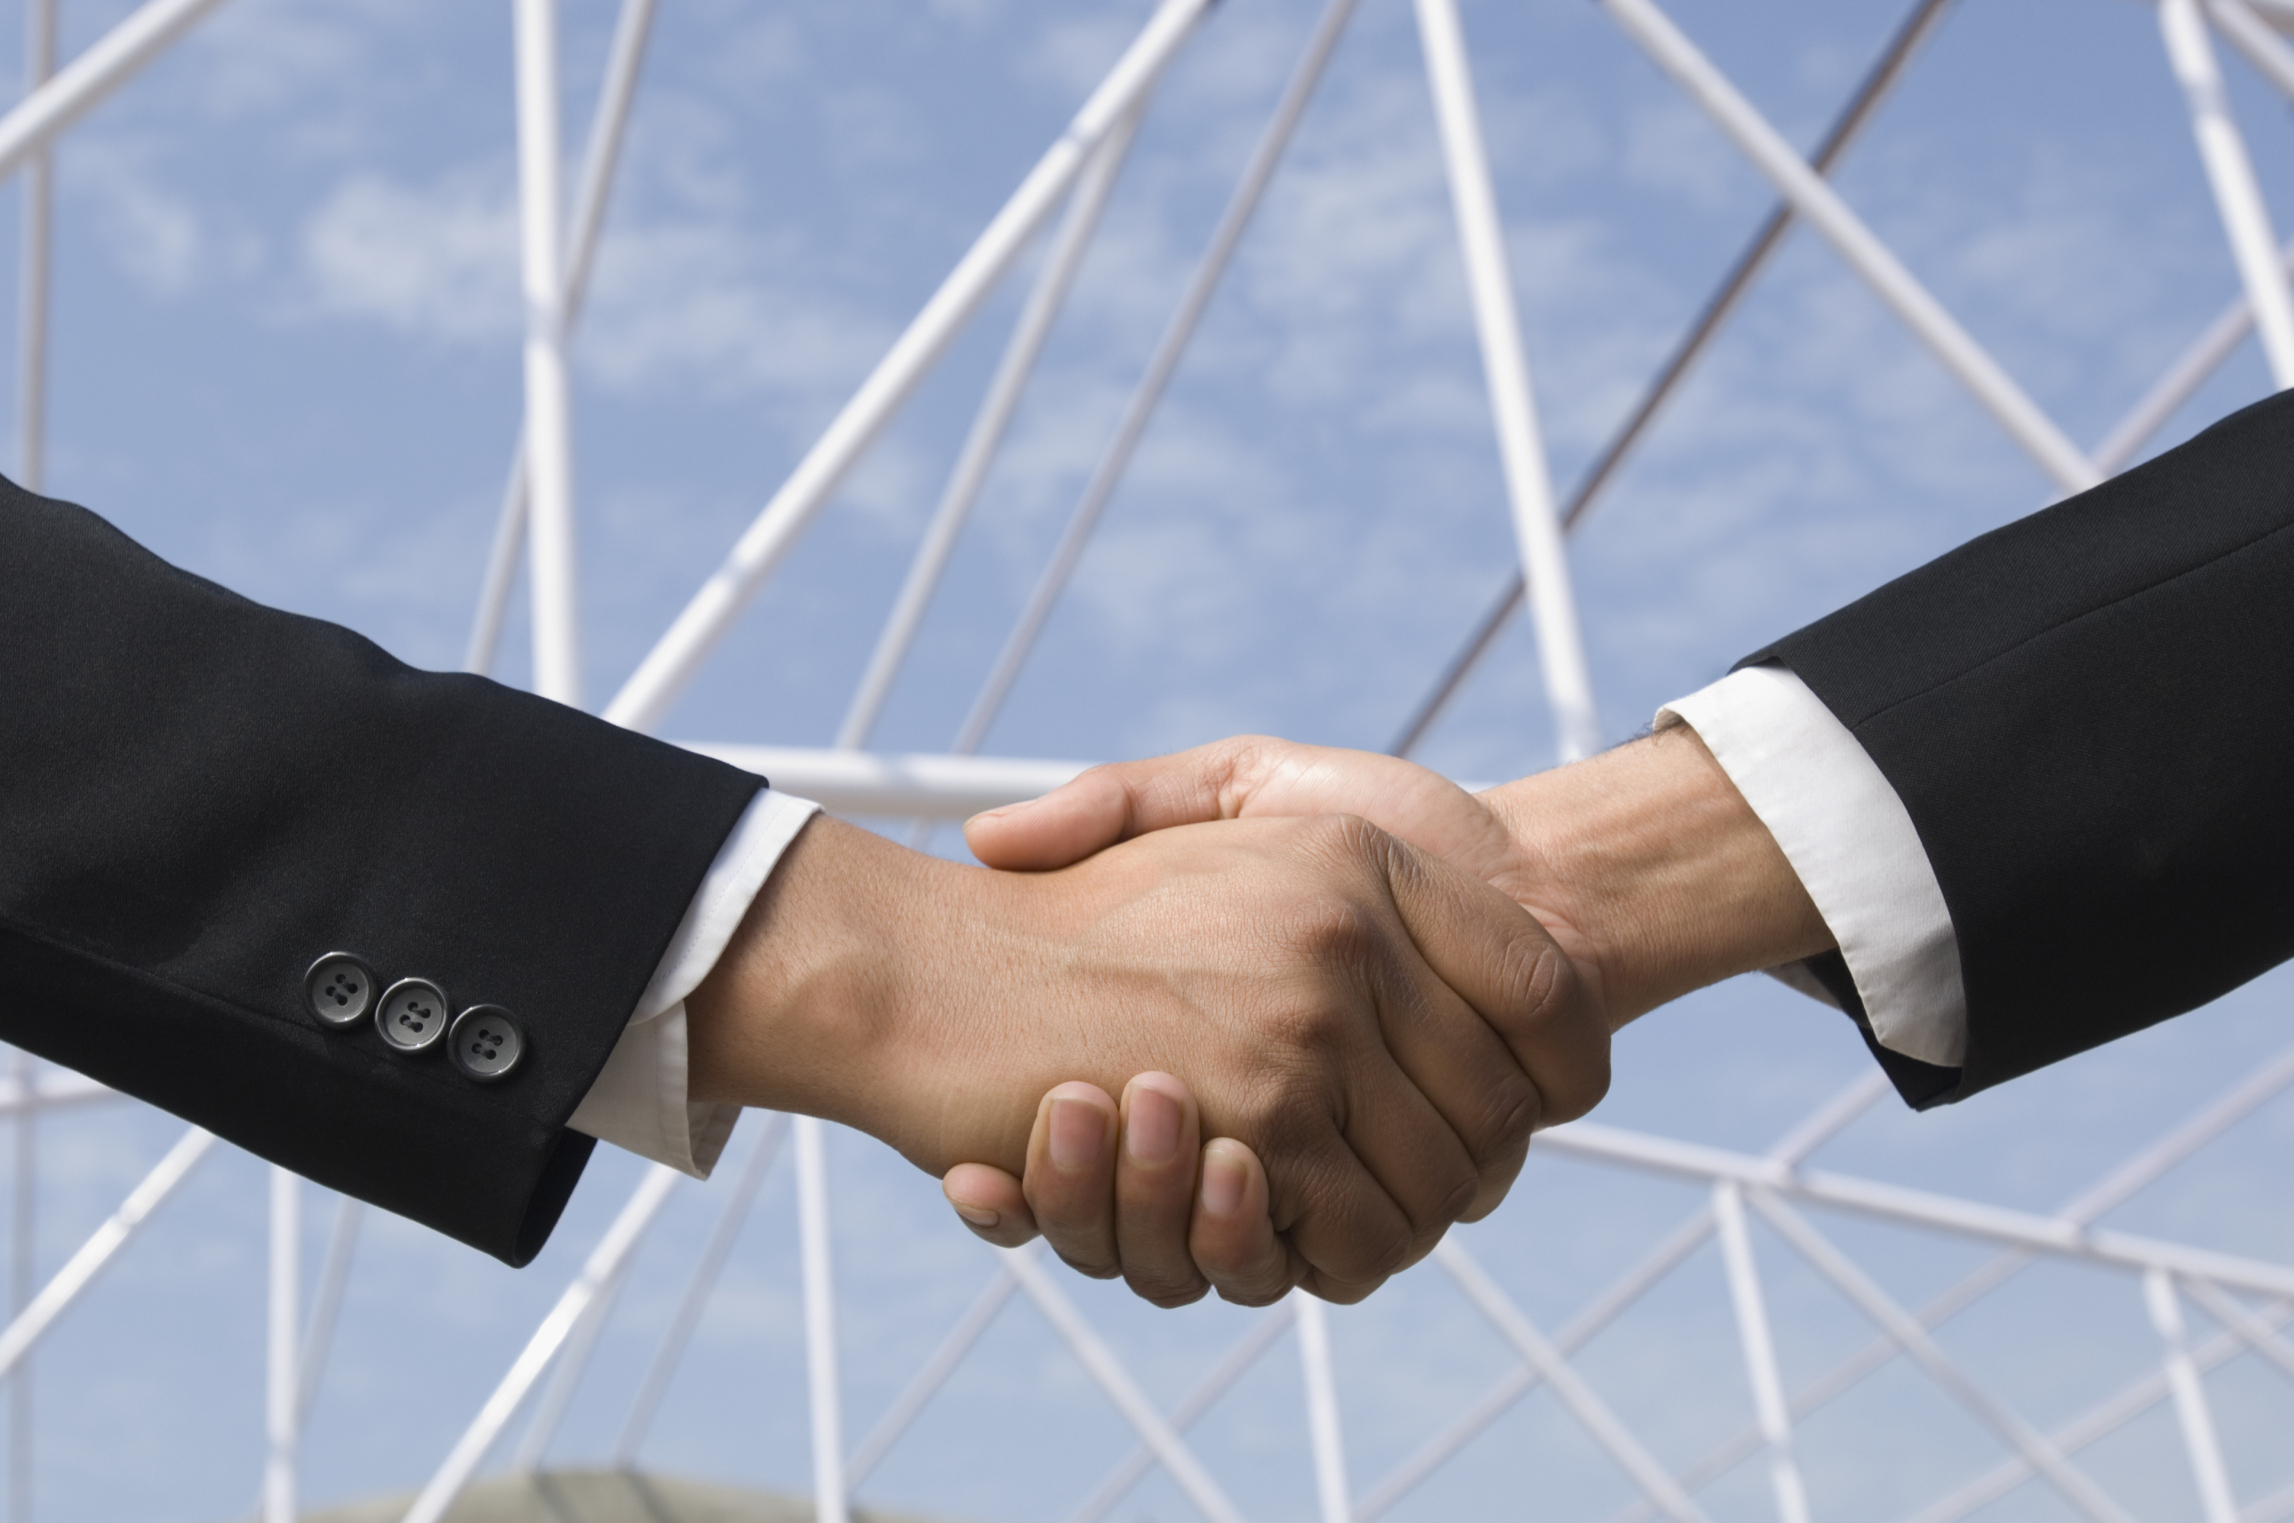 Close-up of two businessmen shaking hands